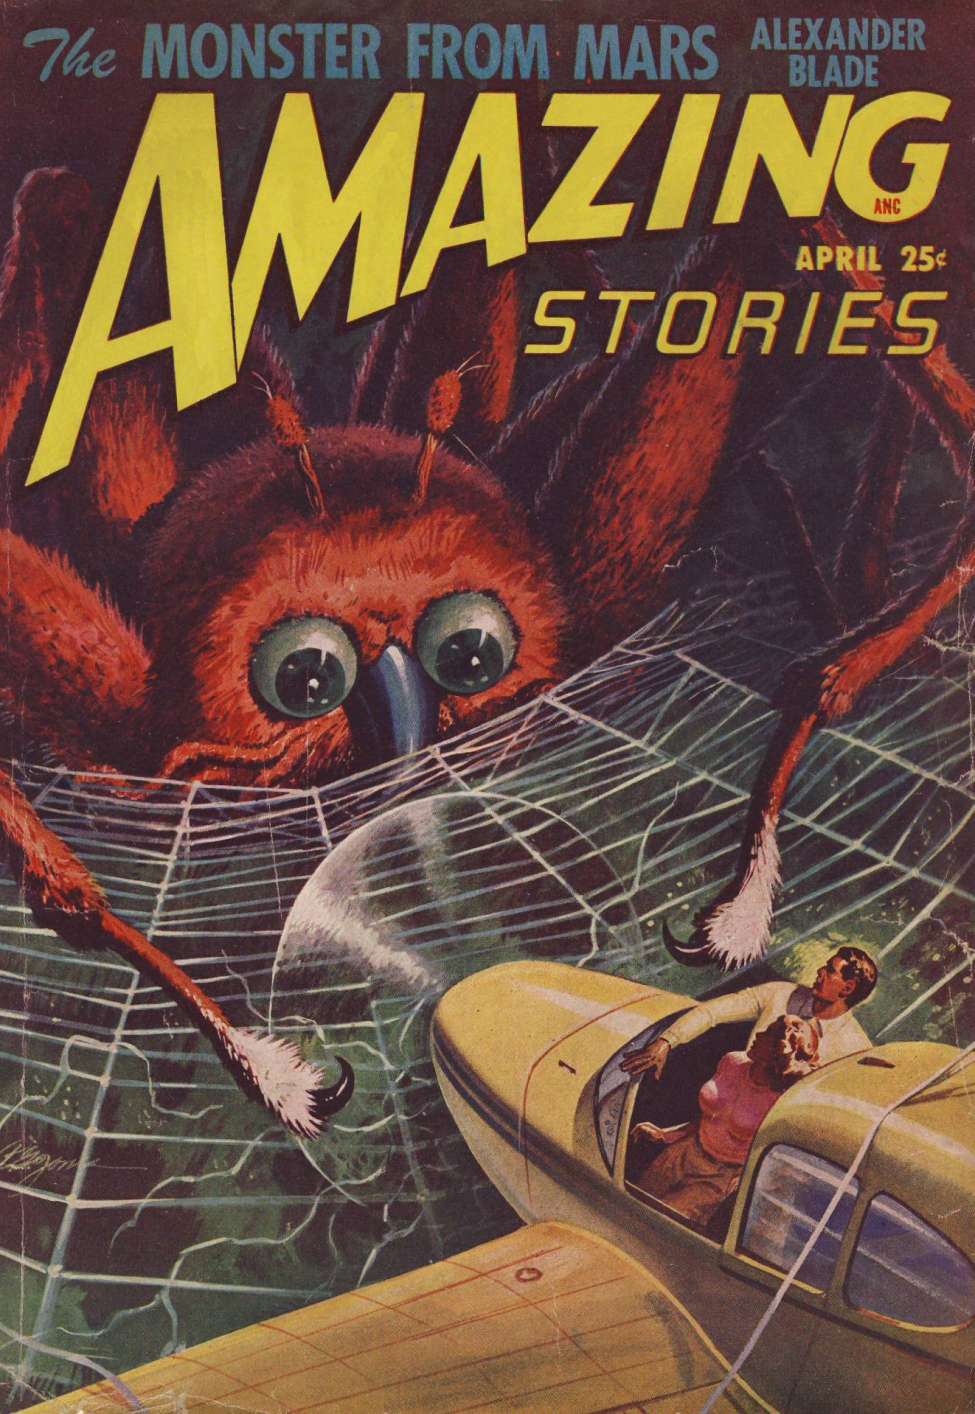 Comic Book Cover For Amazing Stories v22 4 - The Monster from Mars - Alexander Blade